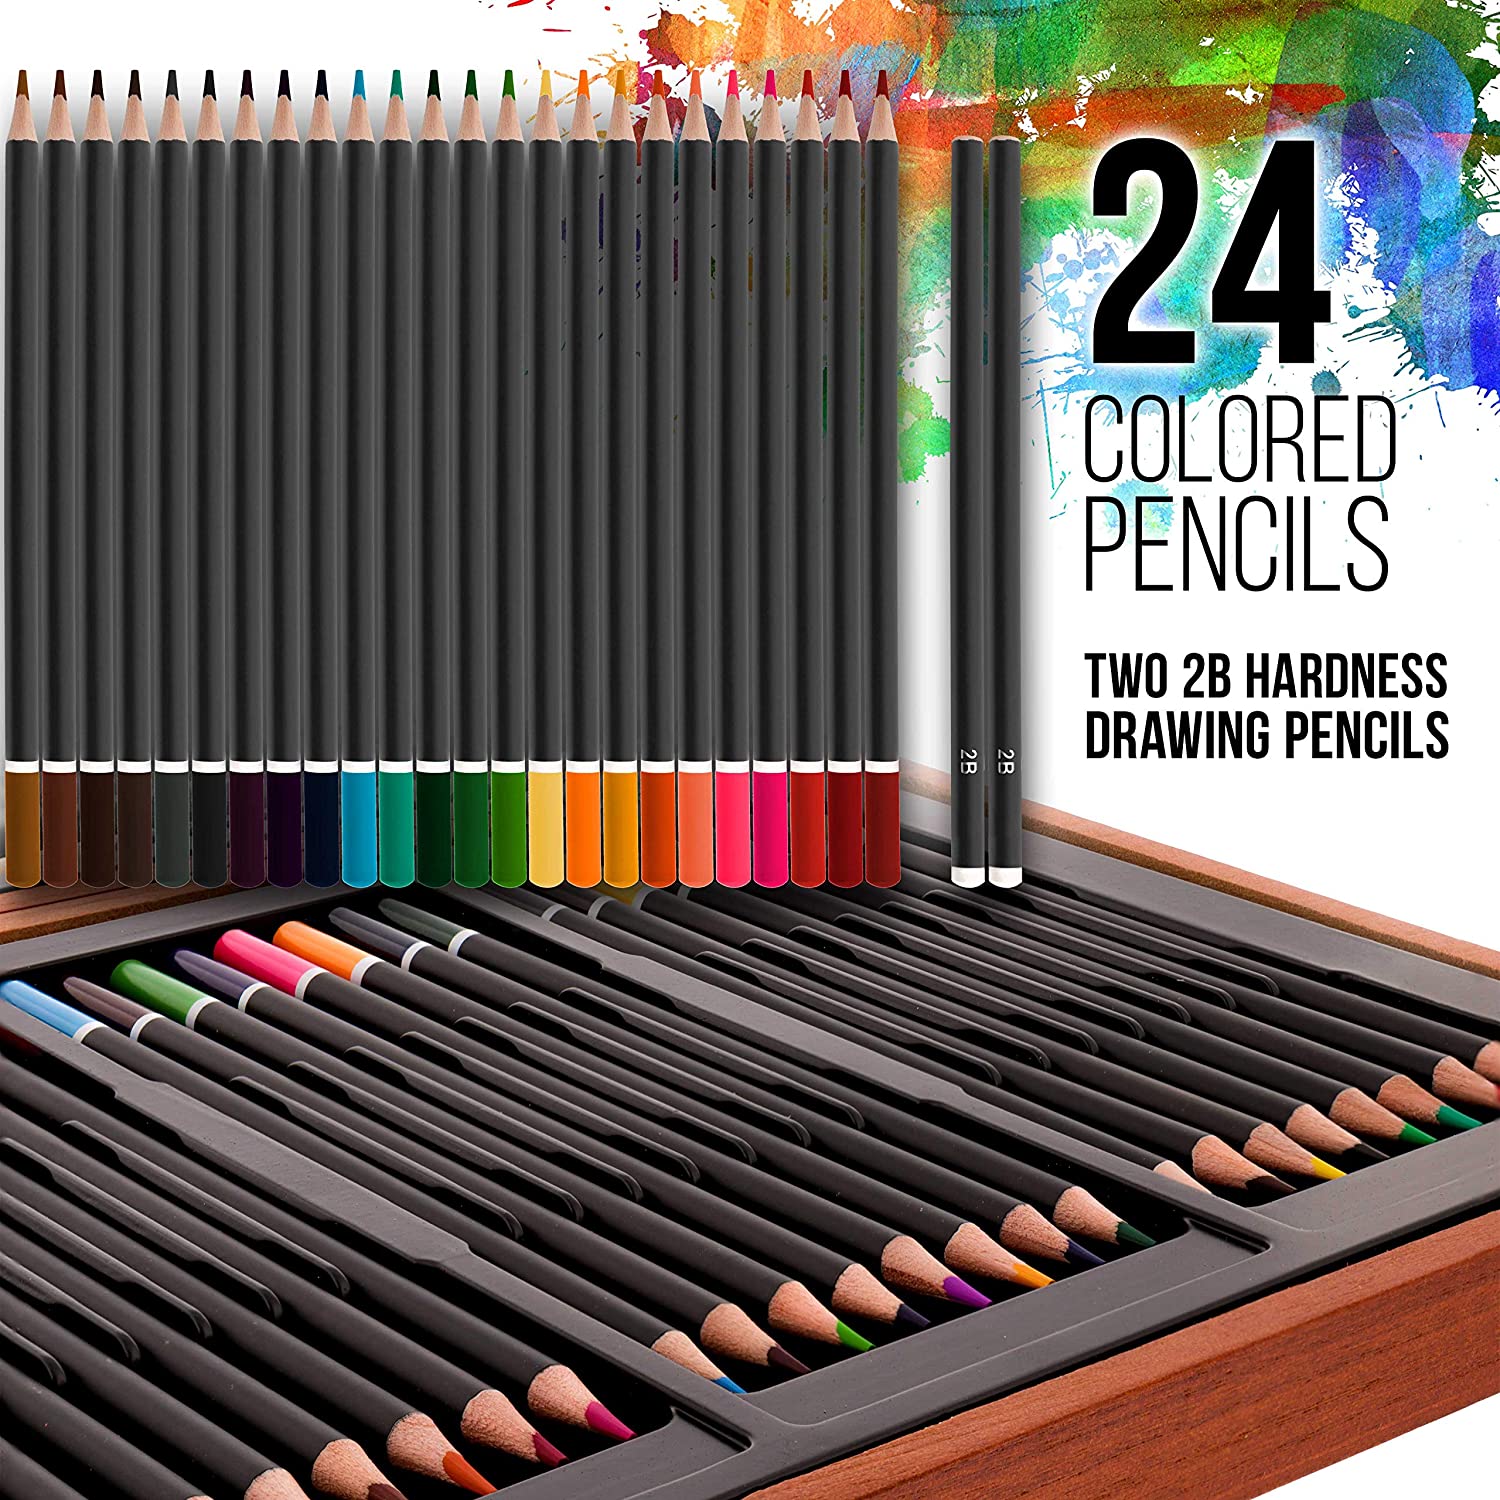 A large number of colored pencils are laid out over two different images. The text reads, '24 colored pencils. Two 2B hardness drawing pencils.'